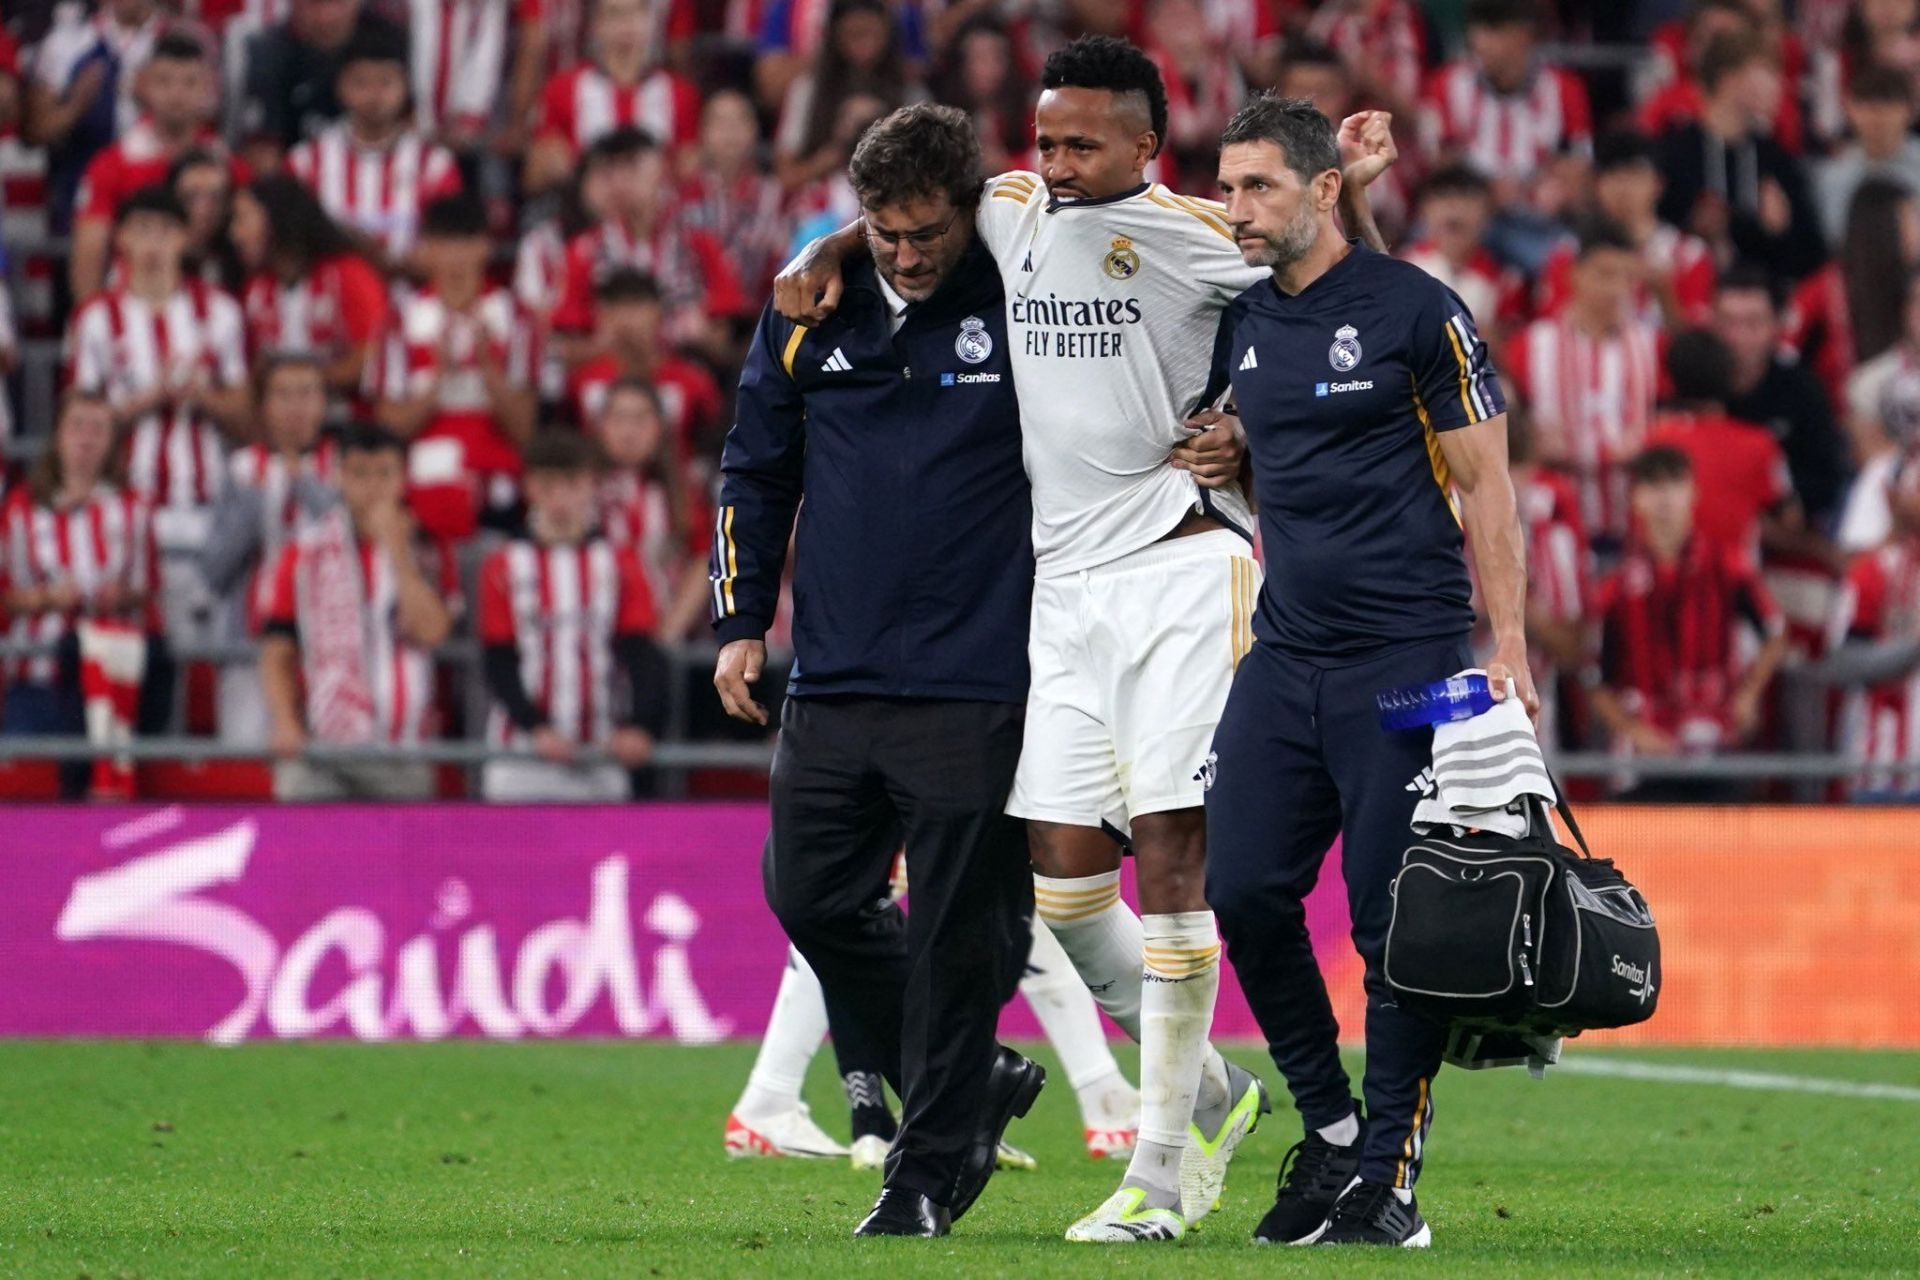 Eder Militao is also among the list of players set to be sidelined for most part of the season